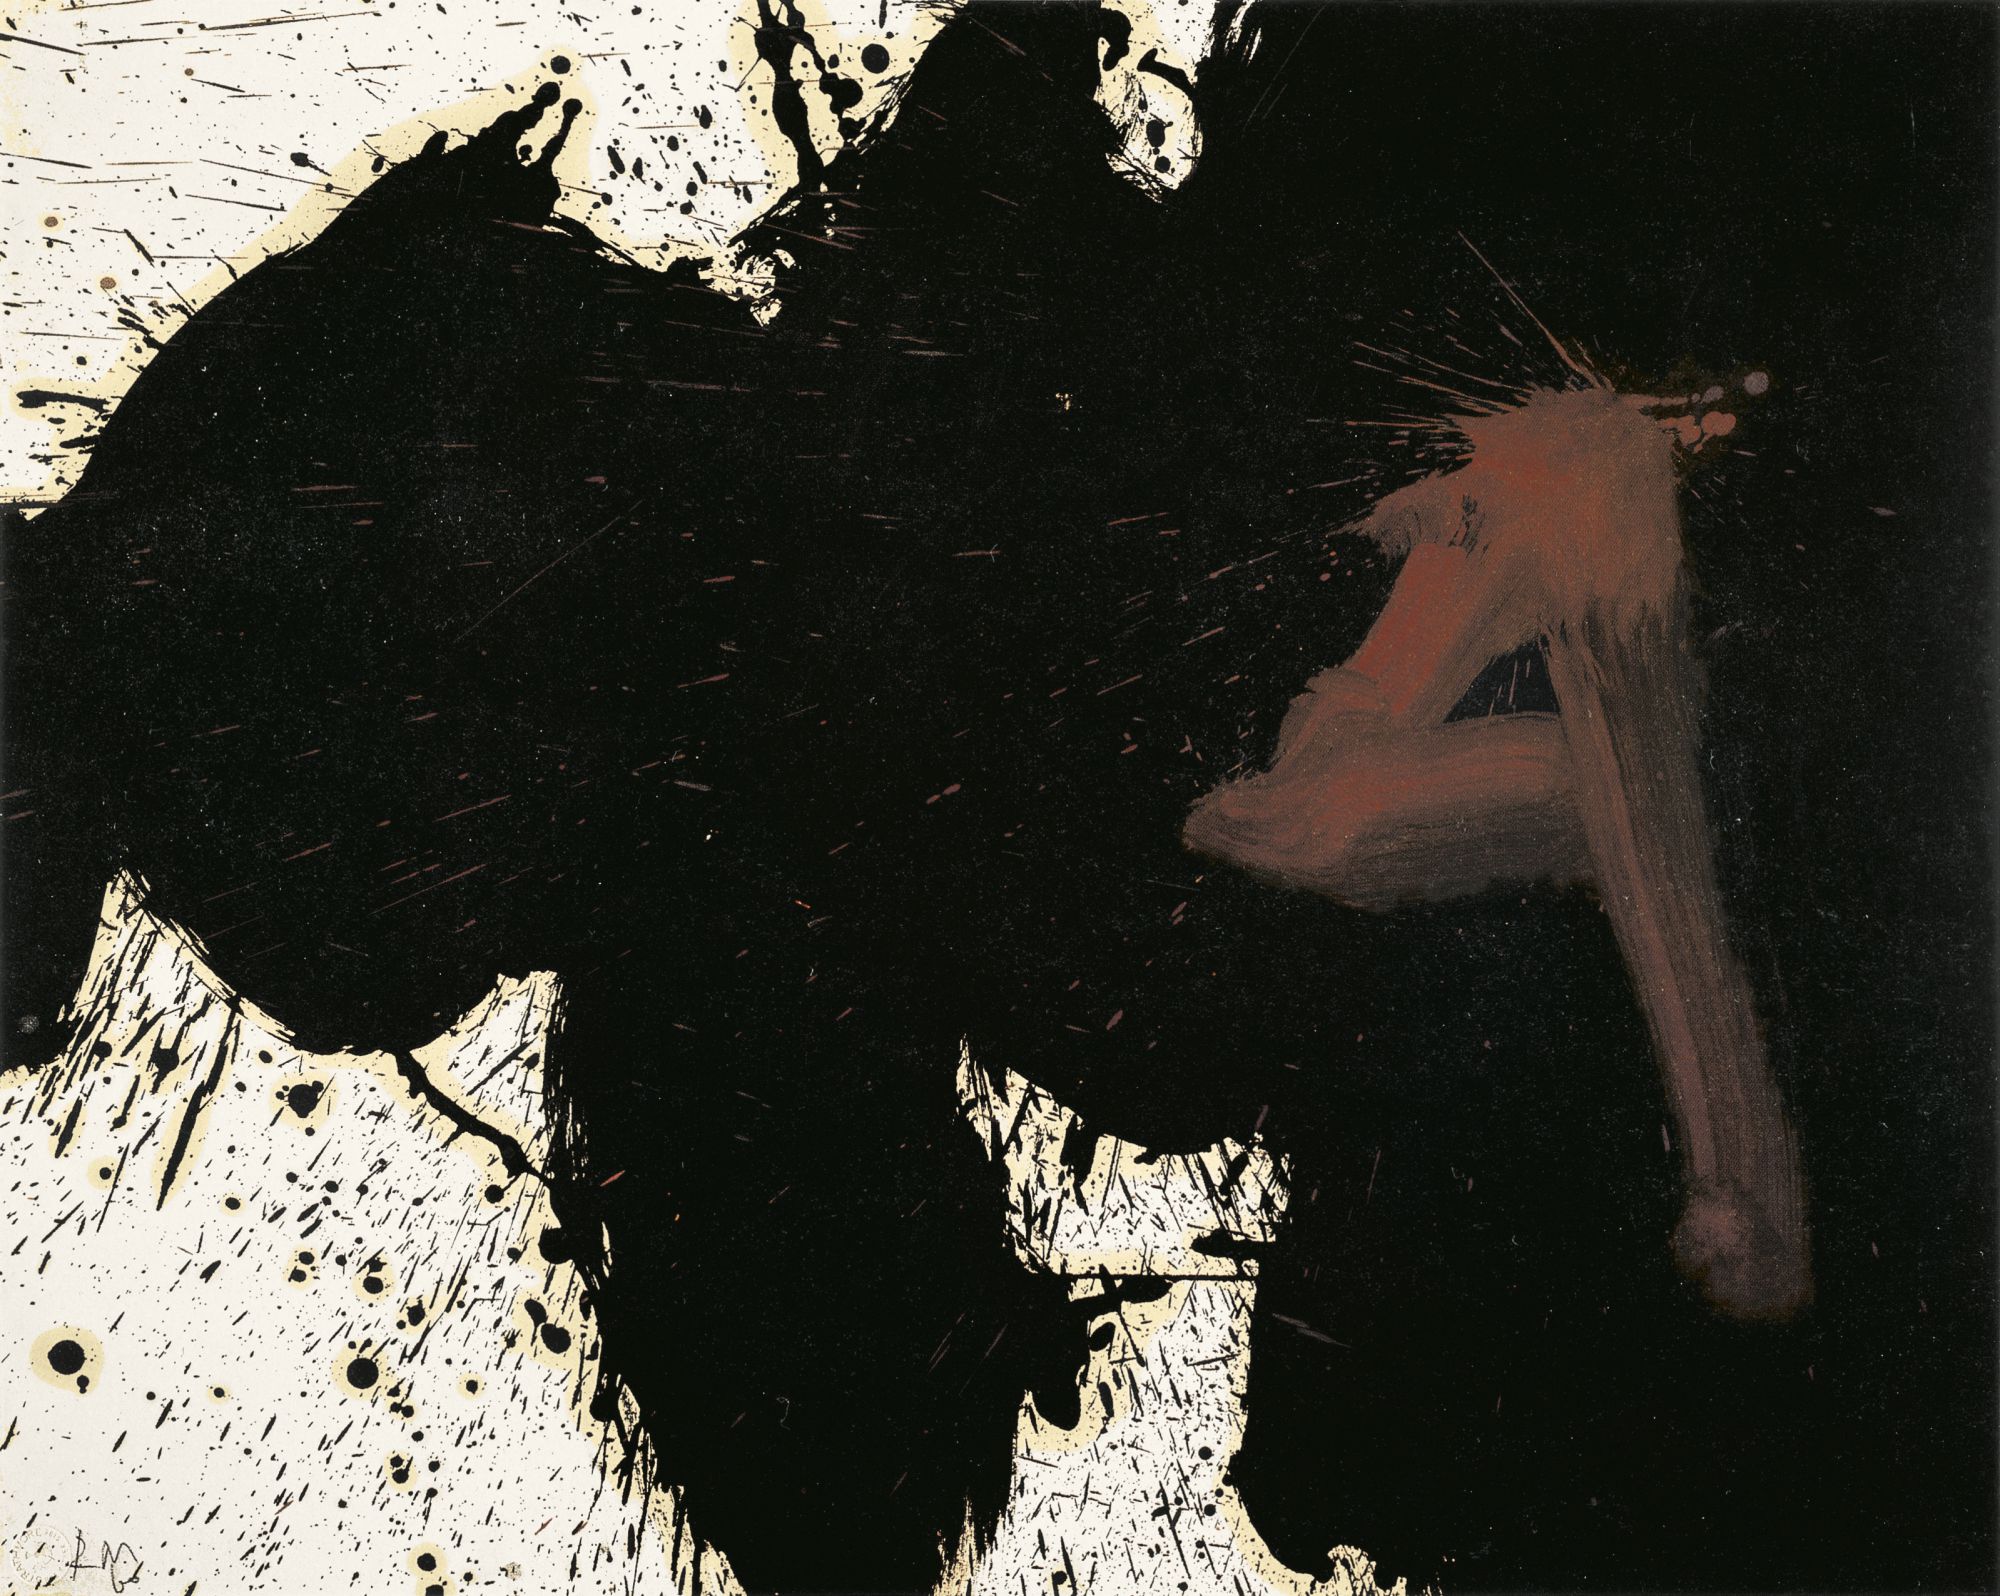 The Figure 4 on an Elegy, 1960, Oil on paper mounted on Masonite, 22 3/4 ✕ 28 3/4 in. (57.8 ✕ 73 cm)